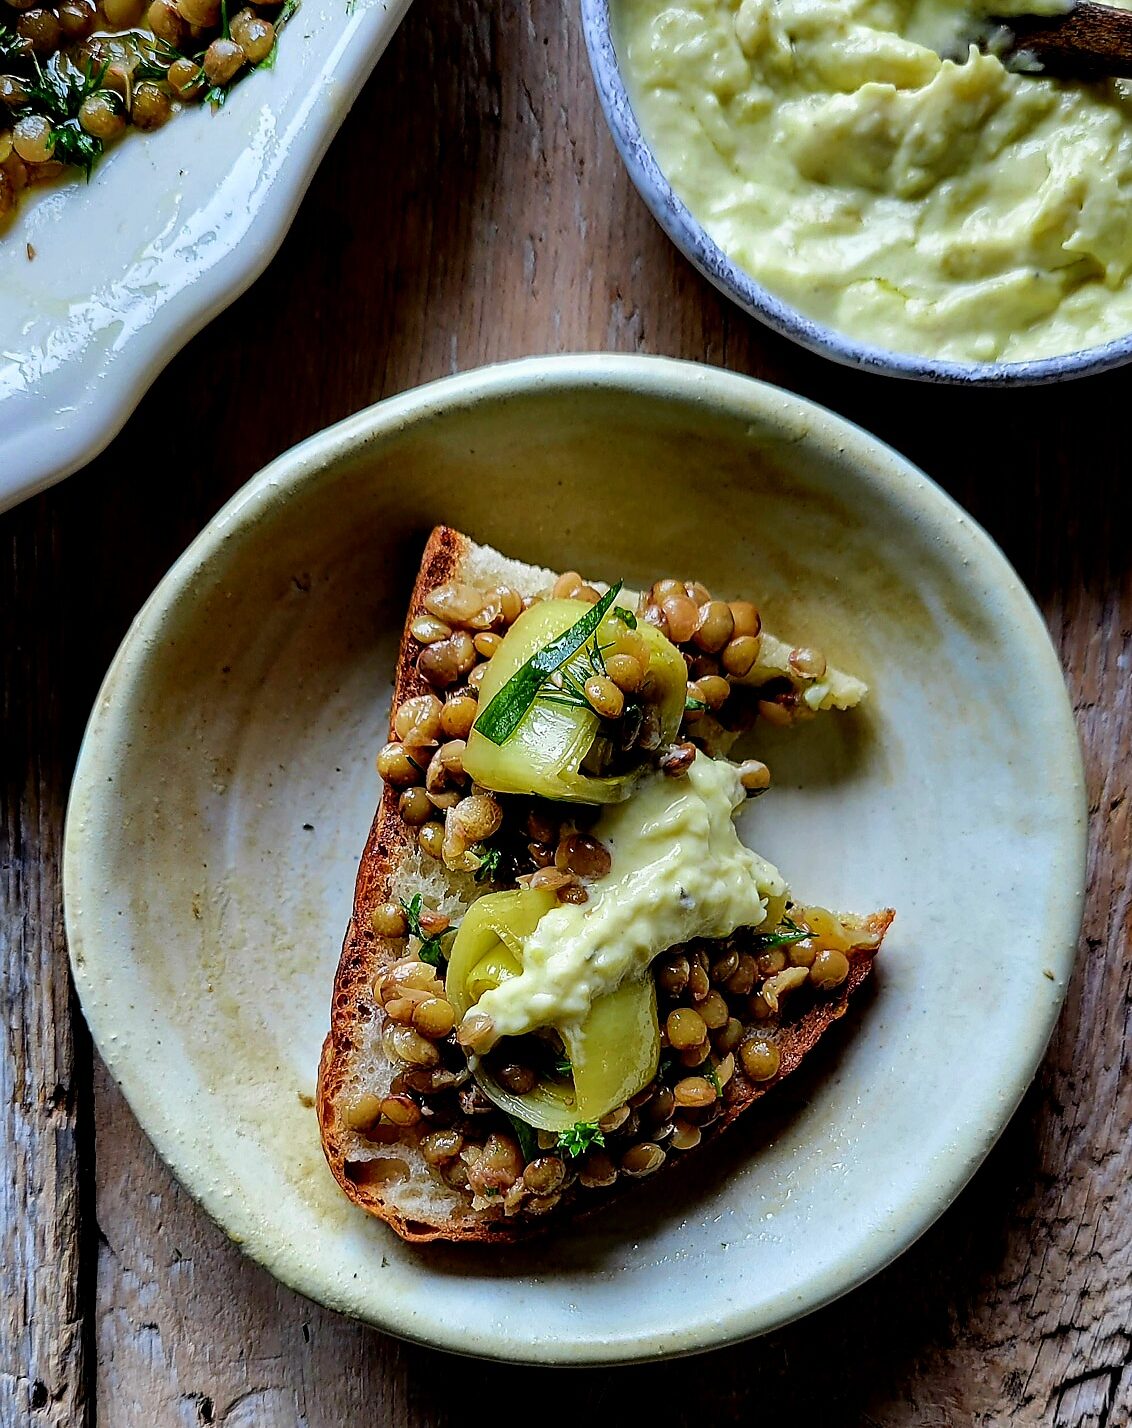 A plate with Leek Confit and lentils spread on crusty bread, topped with Leek Cream.